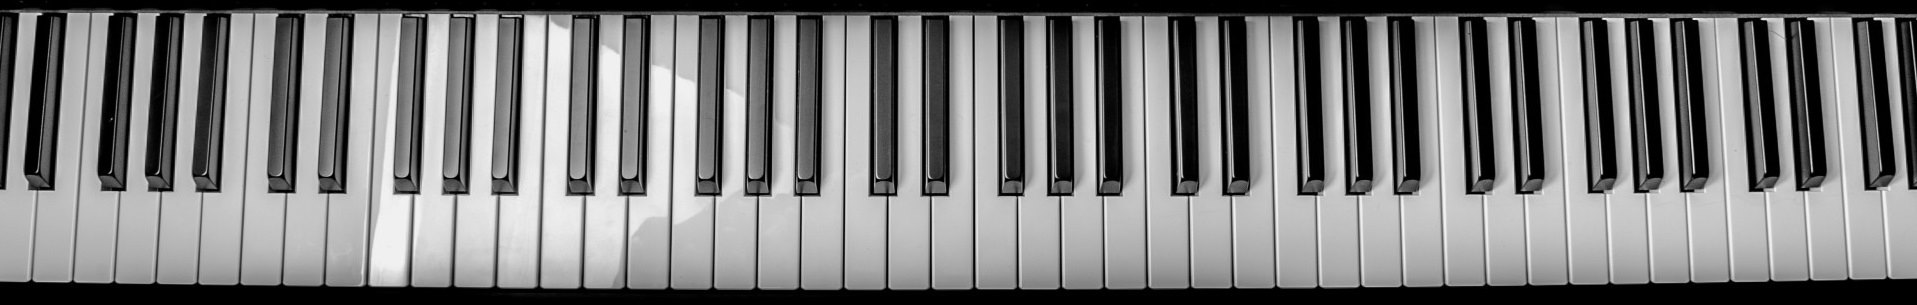 Picture of a piano keyboard